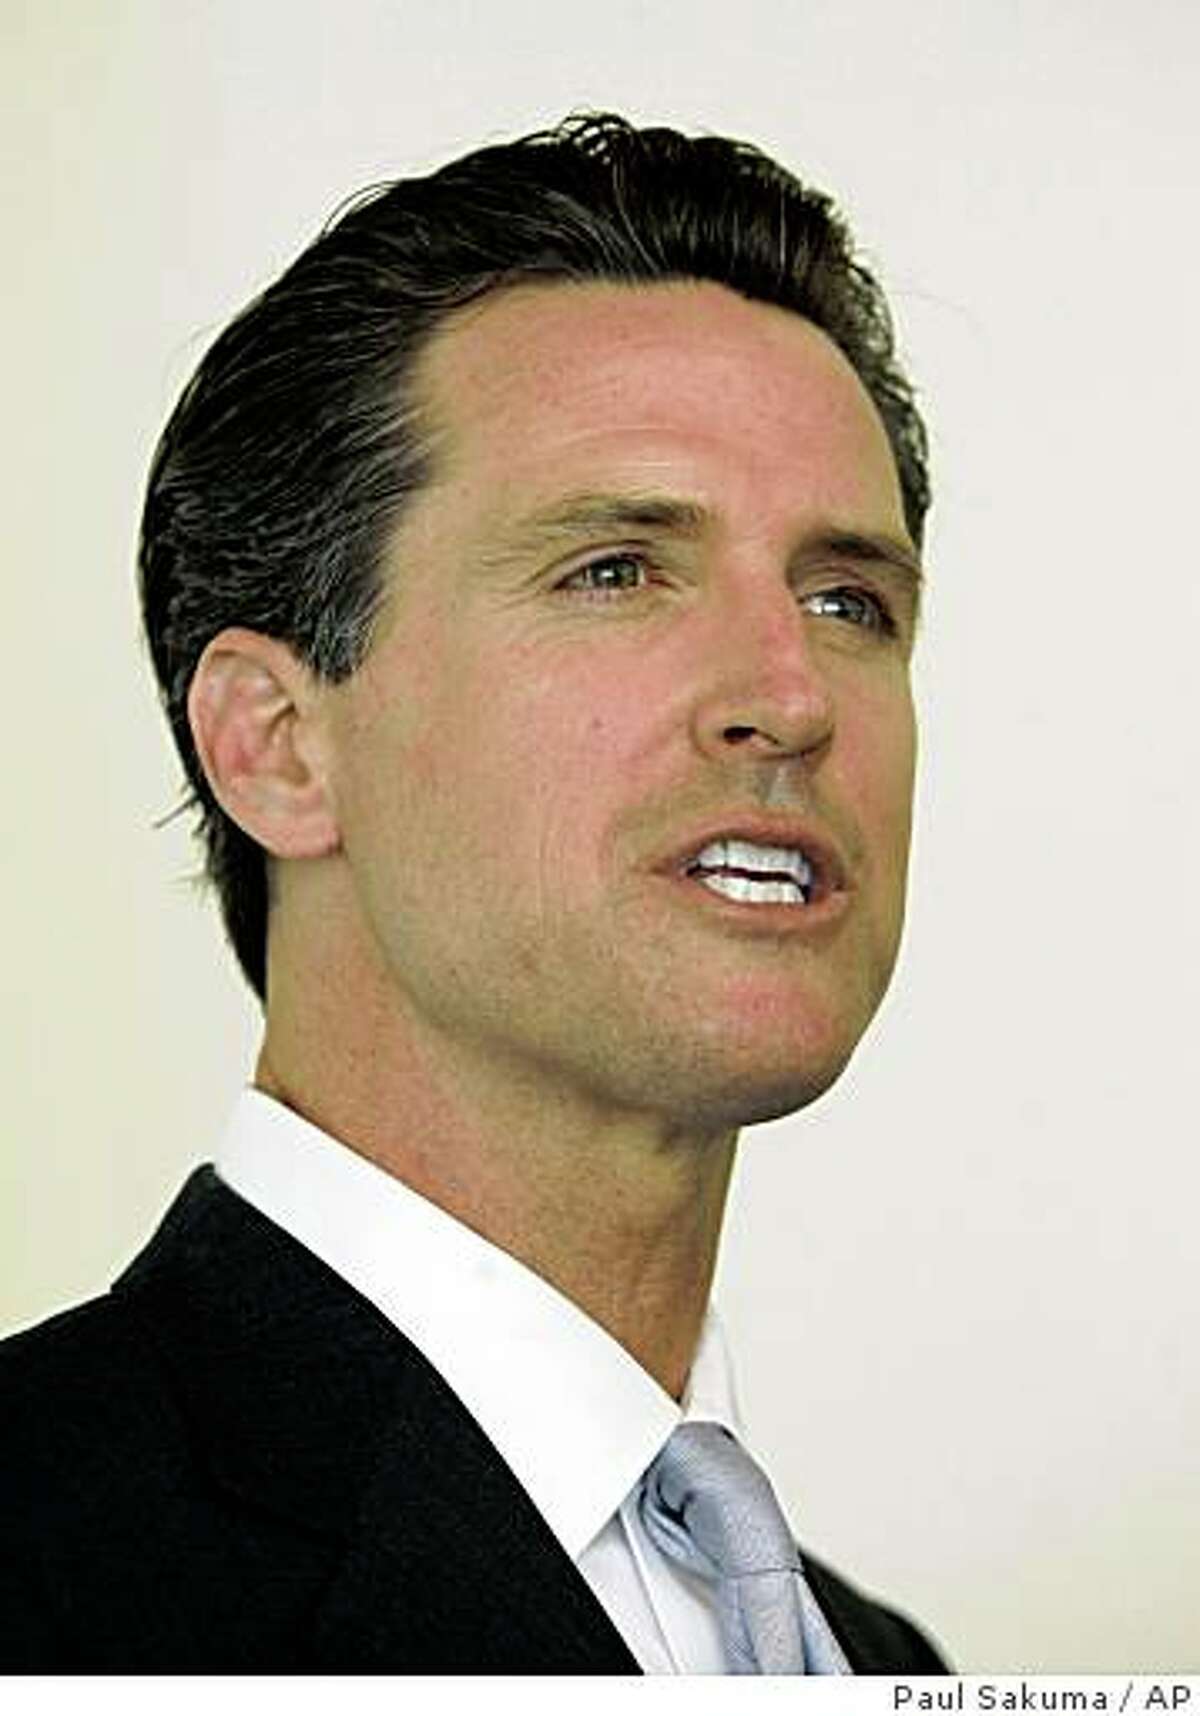 San Francisco Mayor Gavin Newsom formally announces his candidacy for California governor at Facebook headquarters in Palo Alto, Calif., Tuesday, April 21, 2009. Entering a race that could see him competing against men 15 and 30 years his senior, the 41-year-old Democrat pointedly used YouTube and the social networking sites Twitter and Facebook to disclose that he would seek his party's nomination to succeed Gov. Arnold Schwarzenegger. (AP Photo/Paul Sakuma)